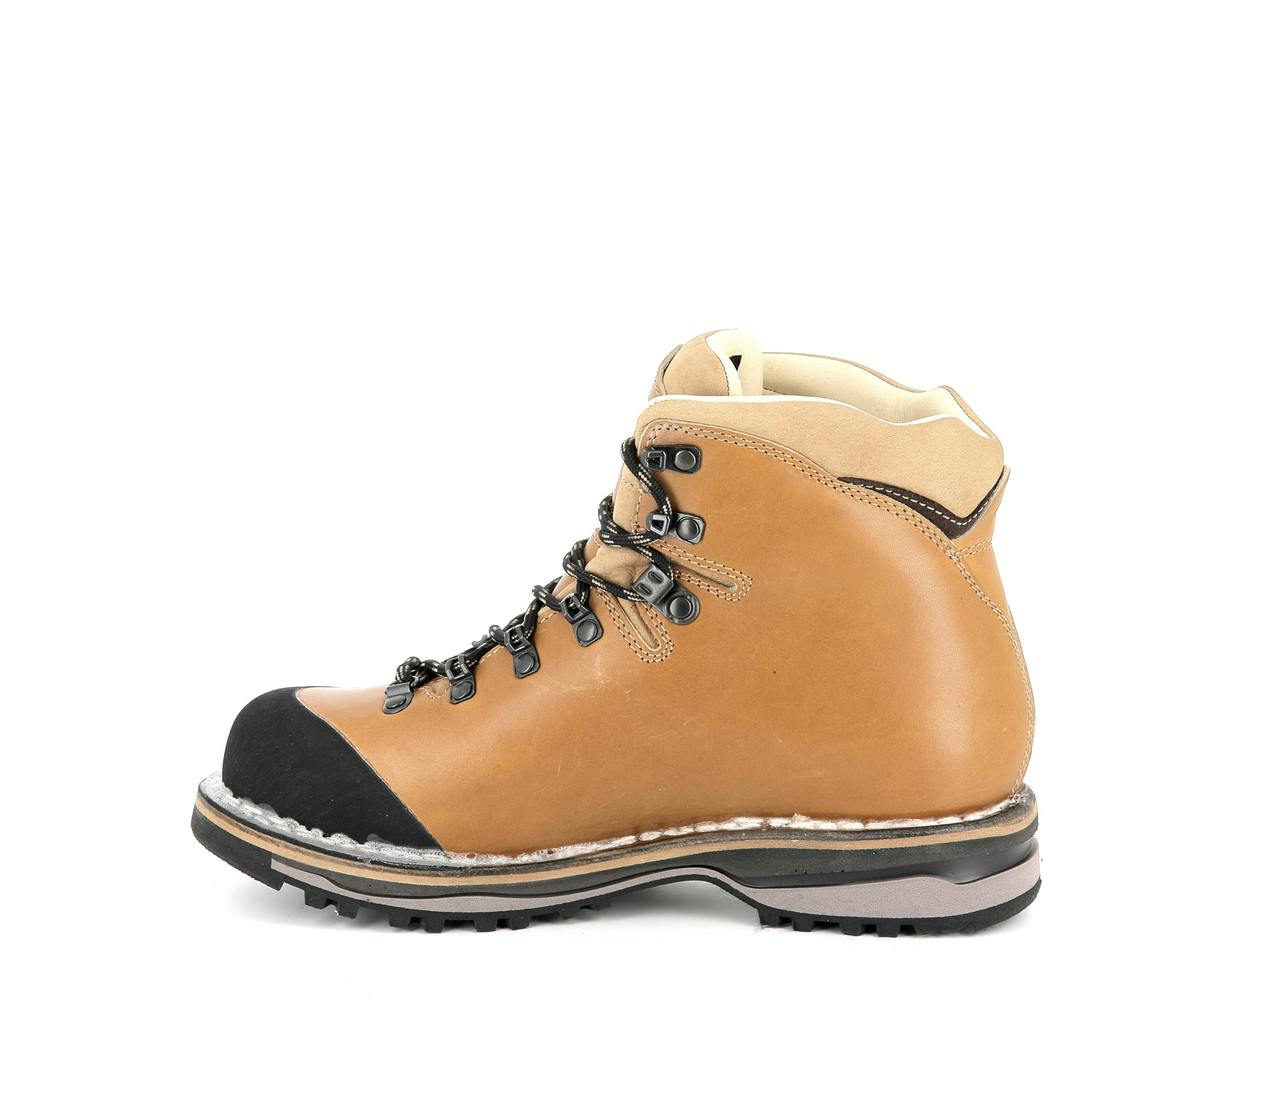 1025 Tofane NW Gore-Tex Backpacking Boots Camel